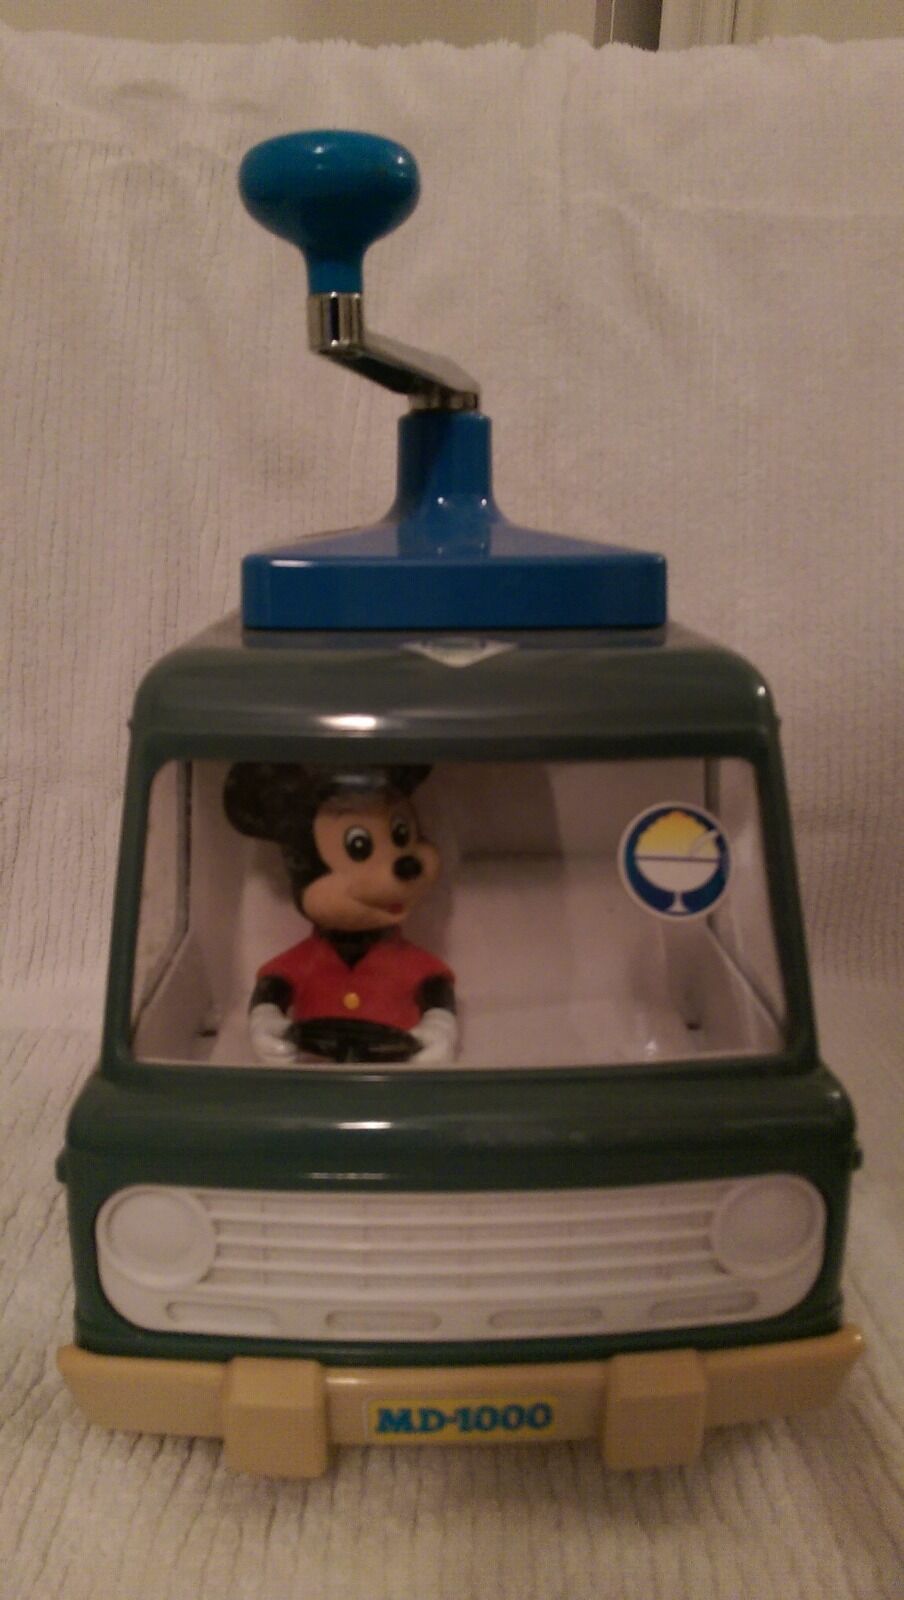 Disney Mickeys Ice Machine Model -MD-1000 Car SOLD IN JAPAN ONLY IN THE BOX